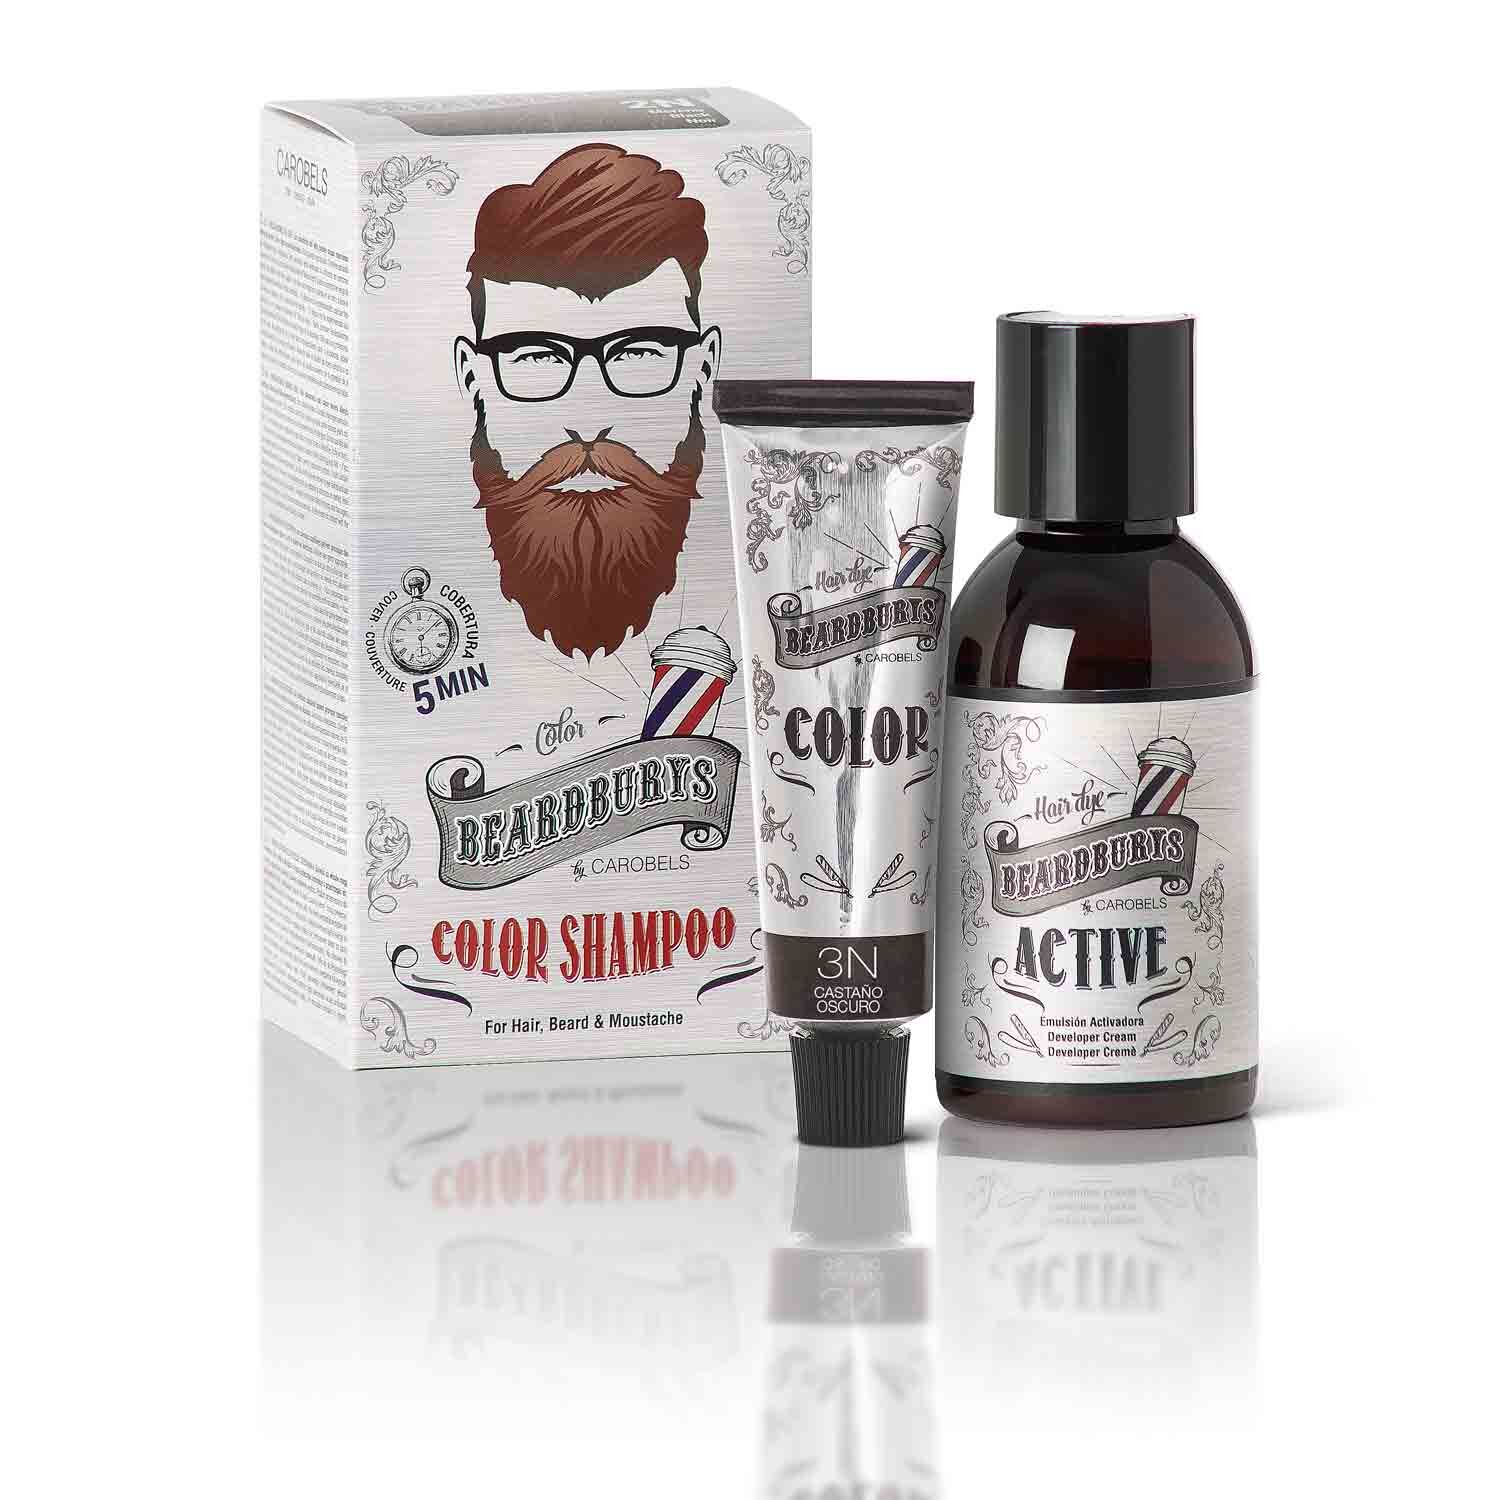 Paragraaf Kenmerkend Ongeschikt Shampoo color - dark brown - Beardburys by Carobels. Professional products  for beards and mustaches